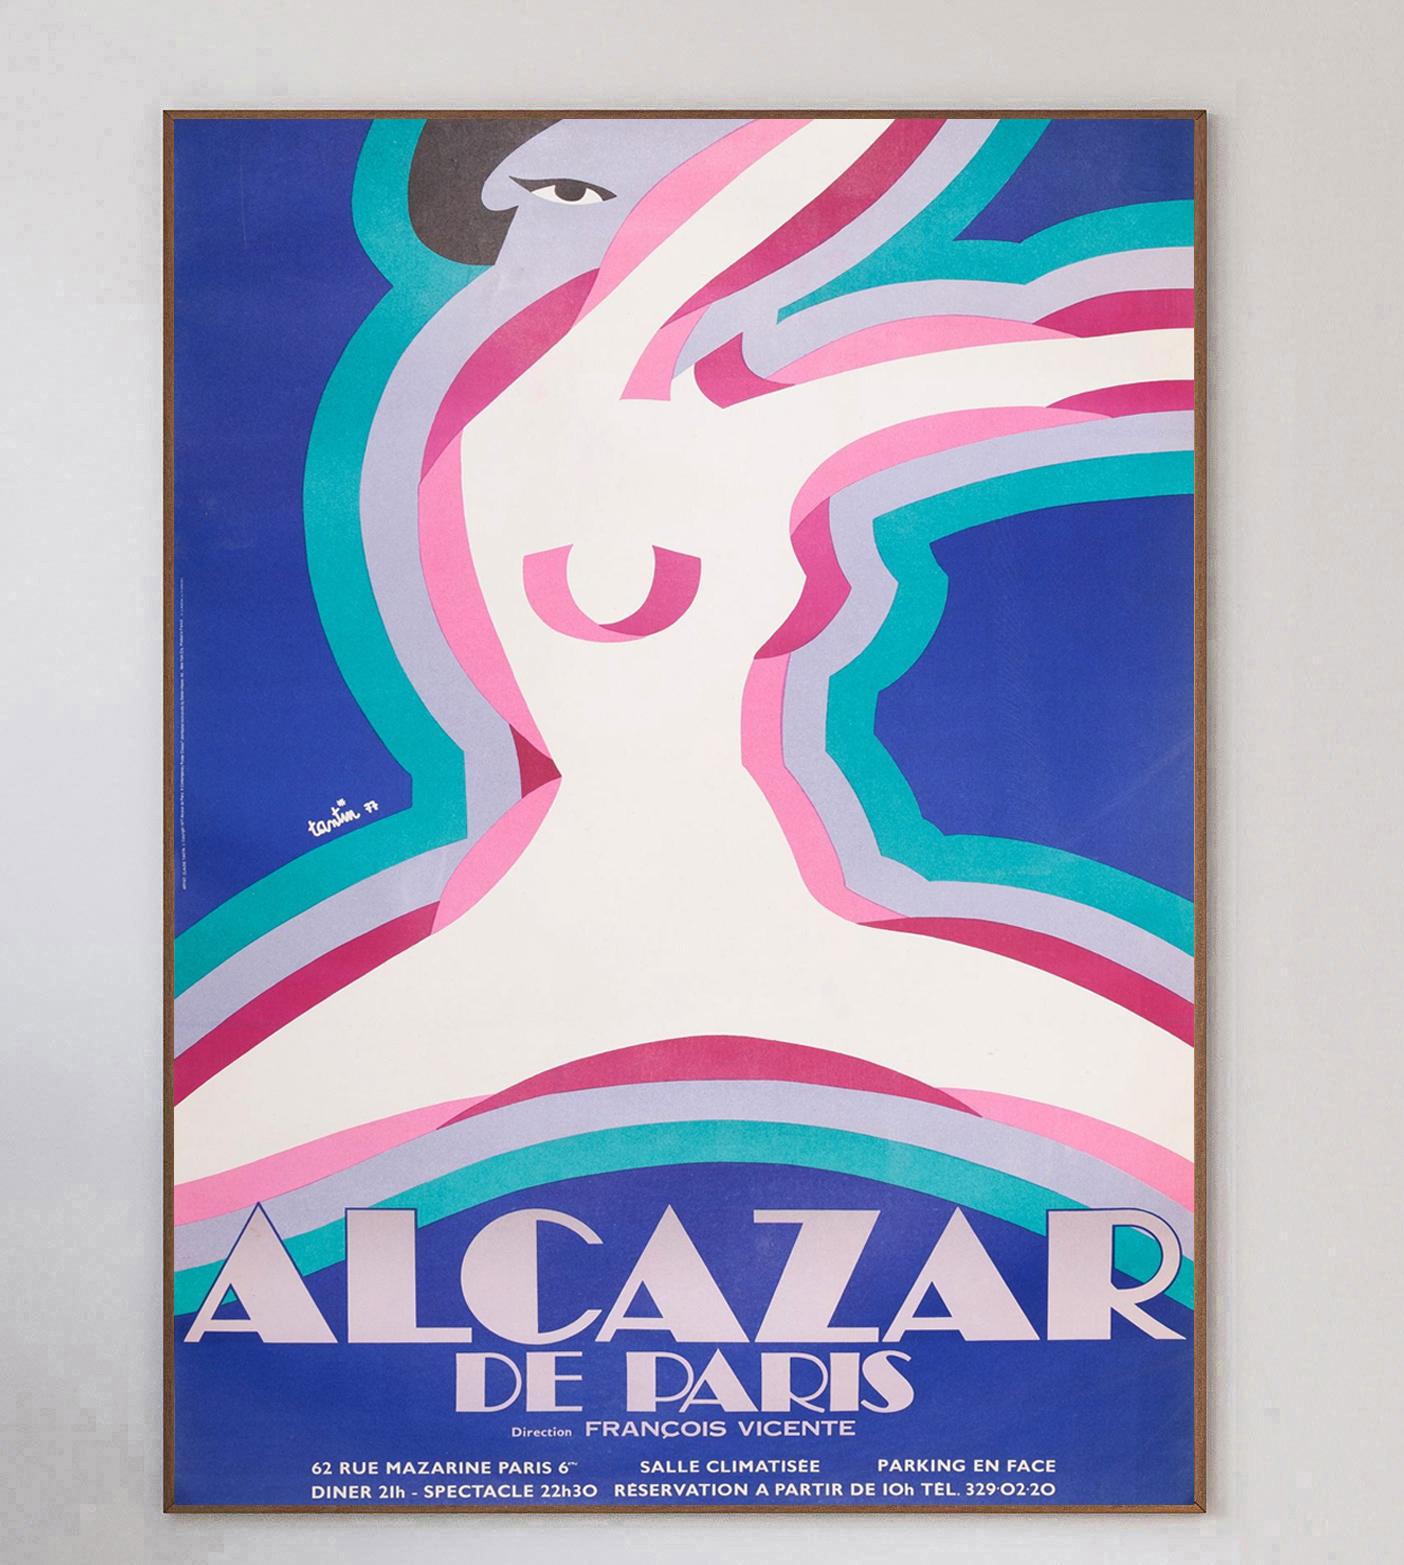 Brilliant poster for Alcazar De Paris at 62 Rue Marazine in Paris, France. The famous Alcazar was once known for its cabaret and evening shows and remains a restaurant and bar today. 

With gorgeous and vibrant artwork from French artist Claude